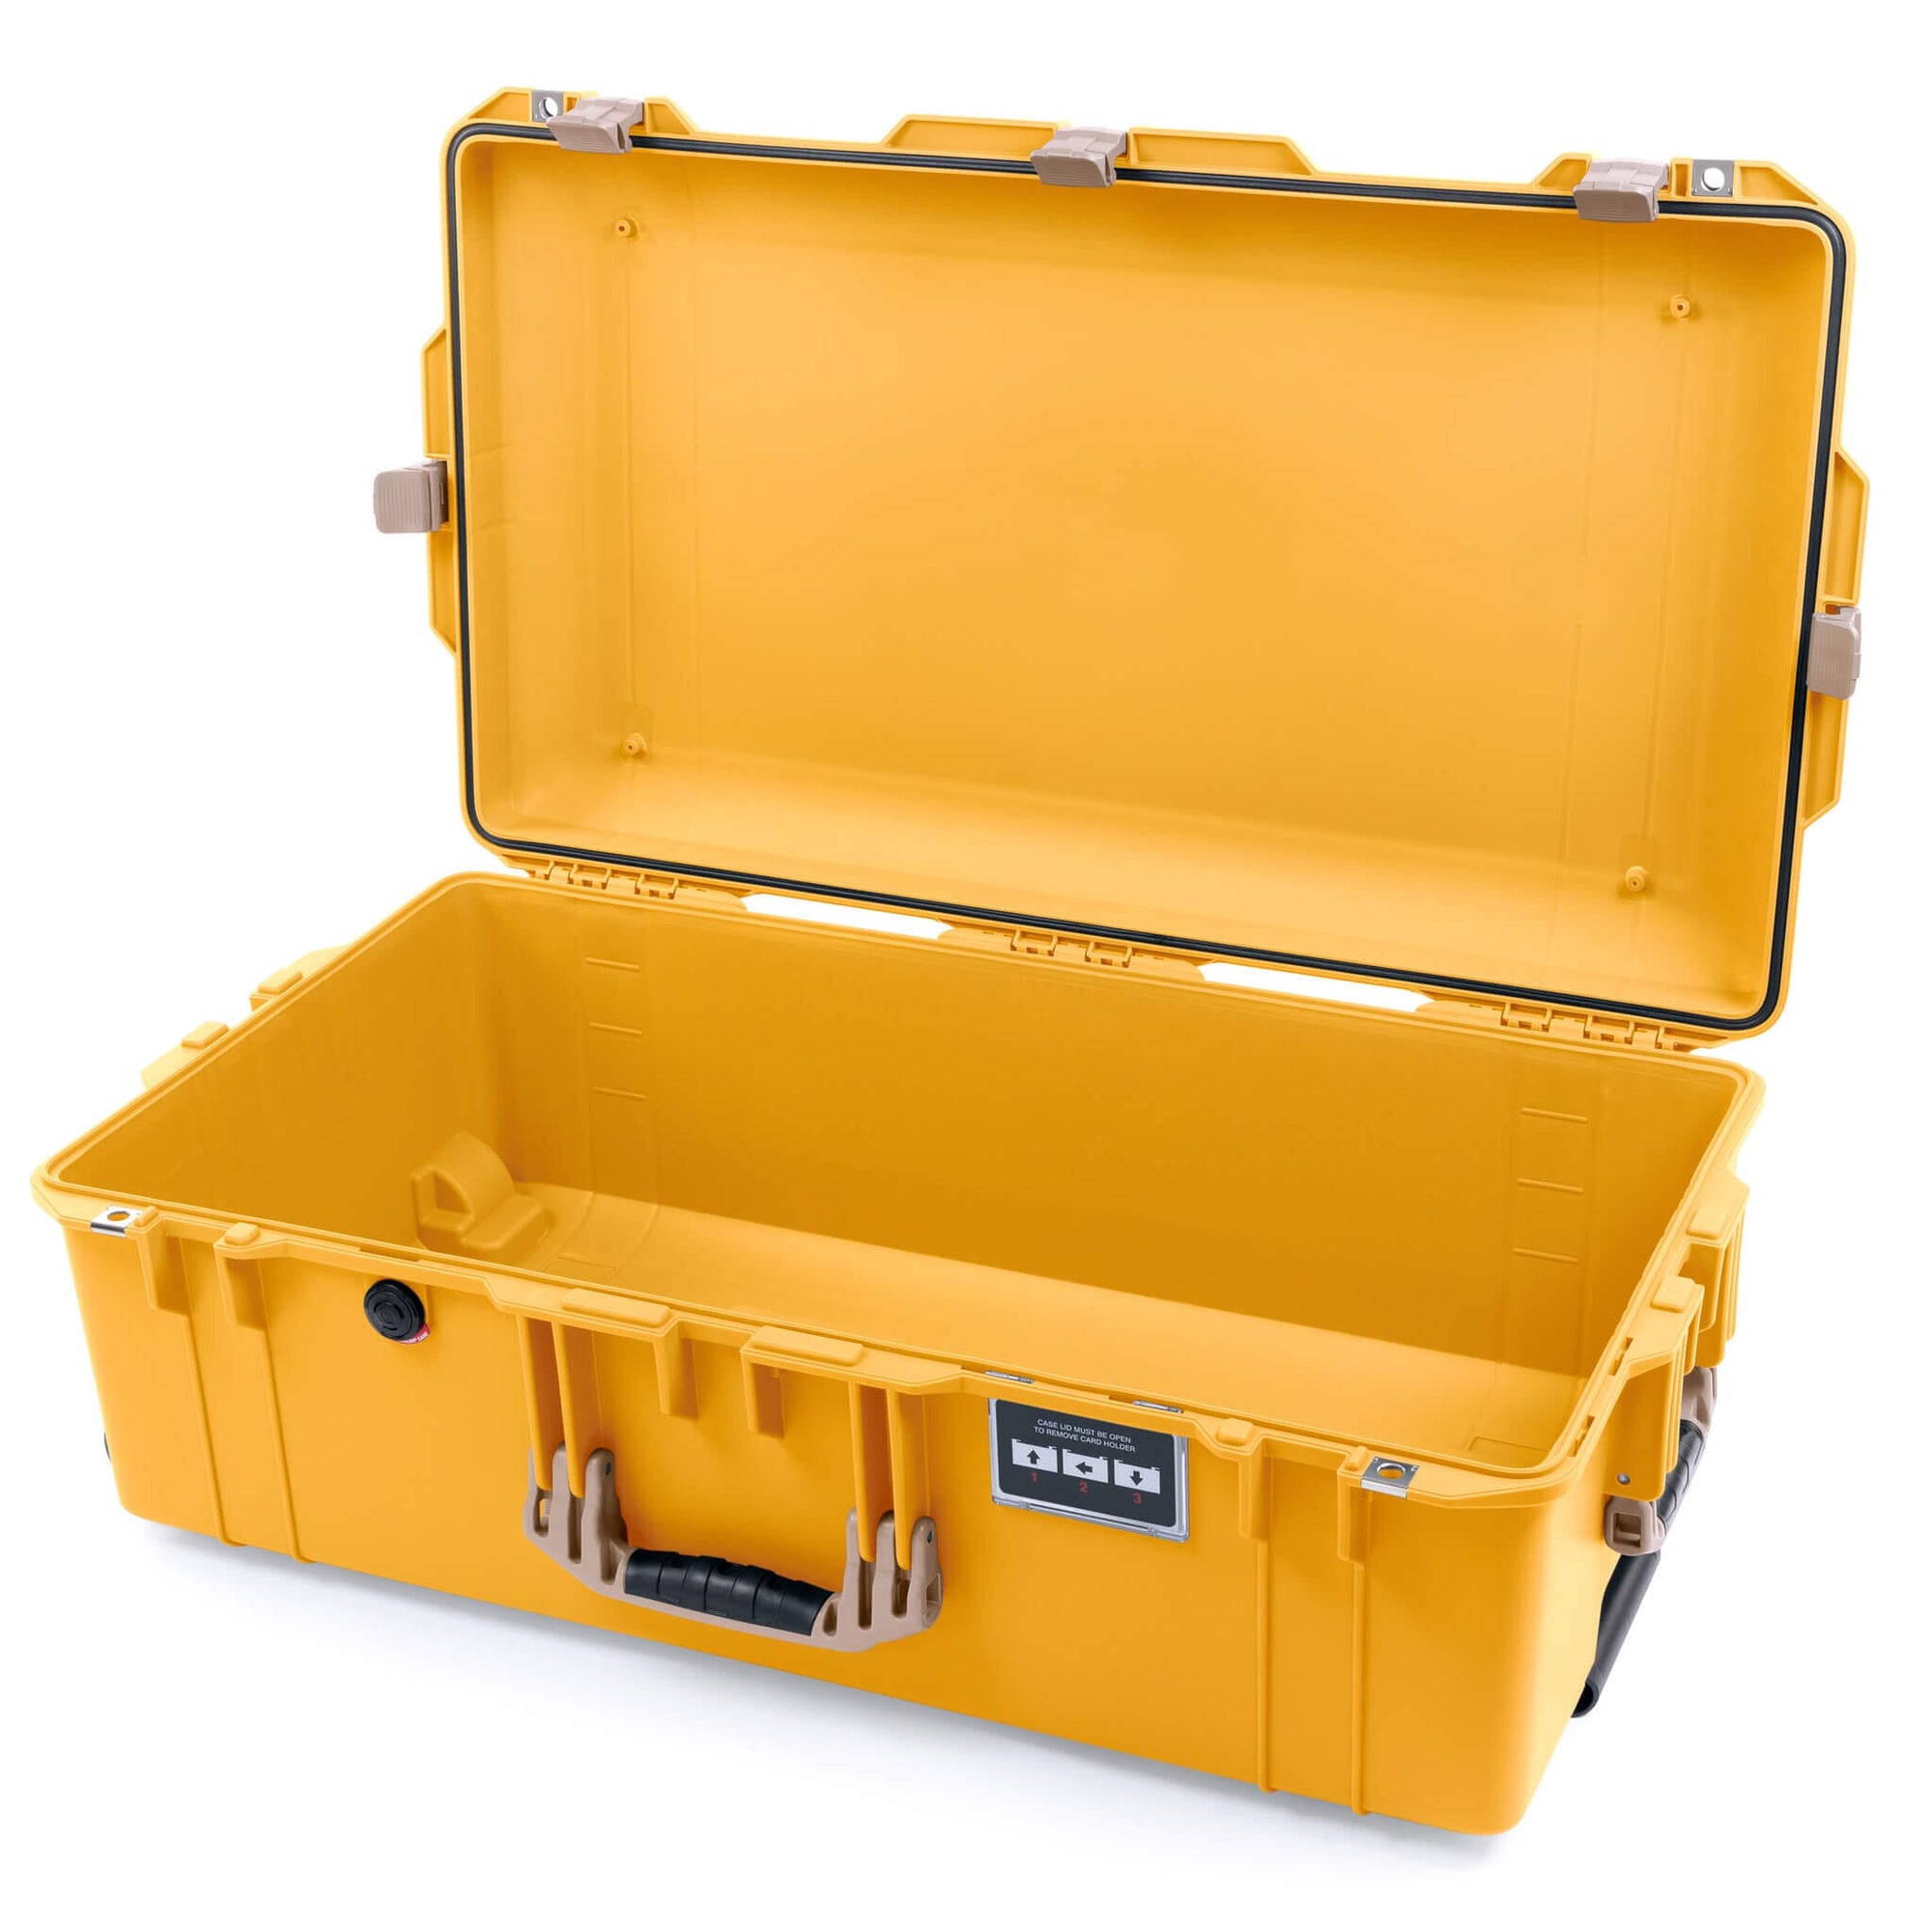 Pelican Carrying Case for Travel Essential - Yellow